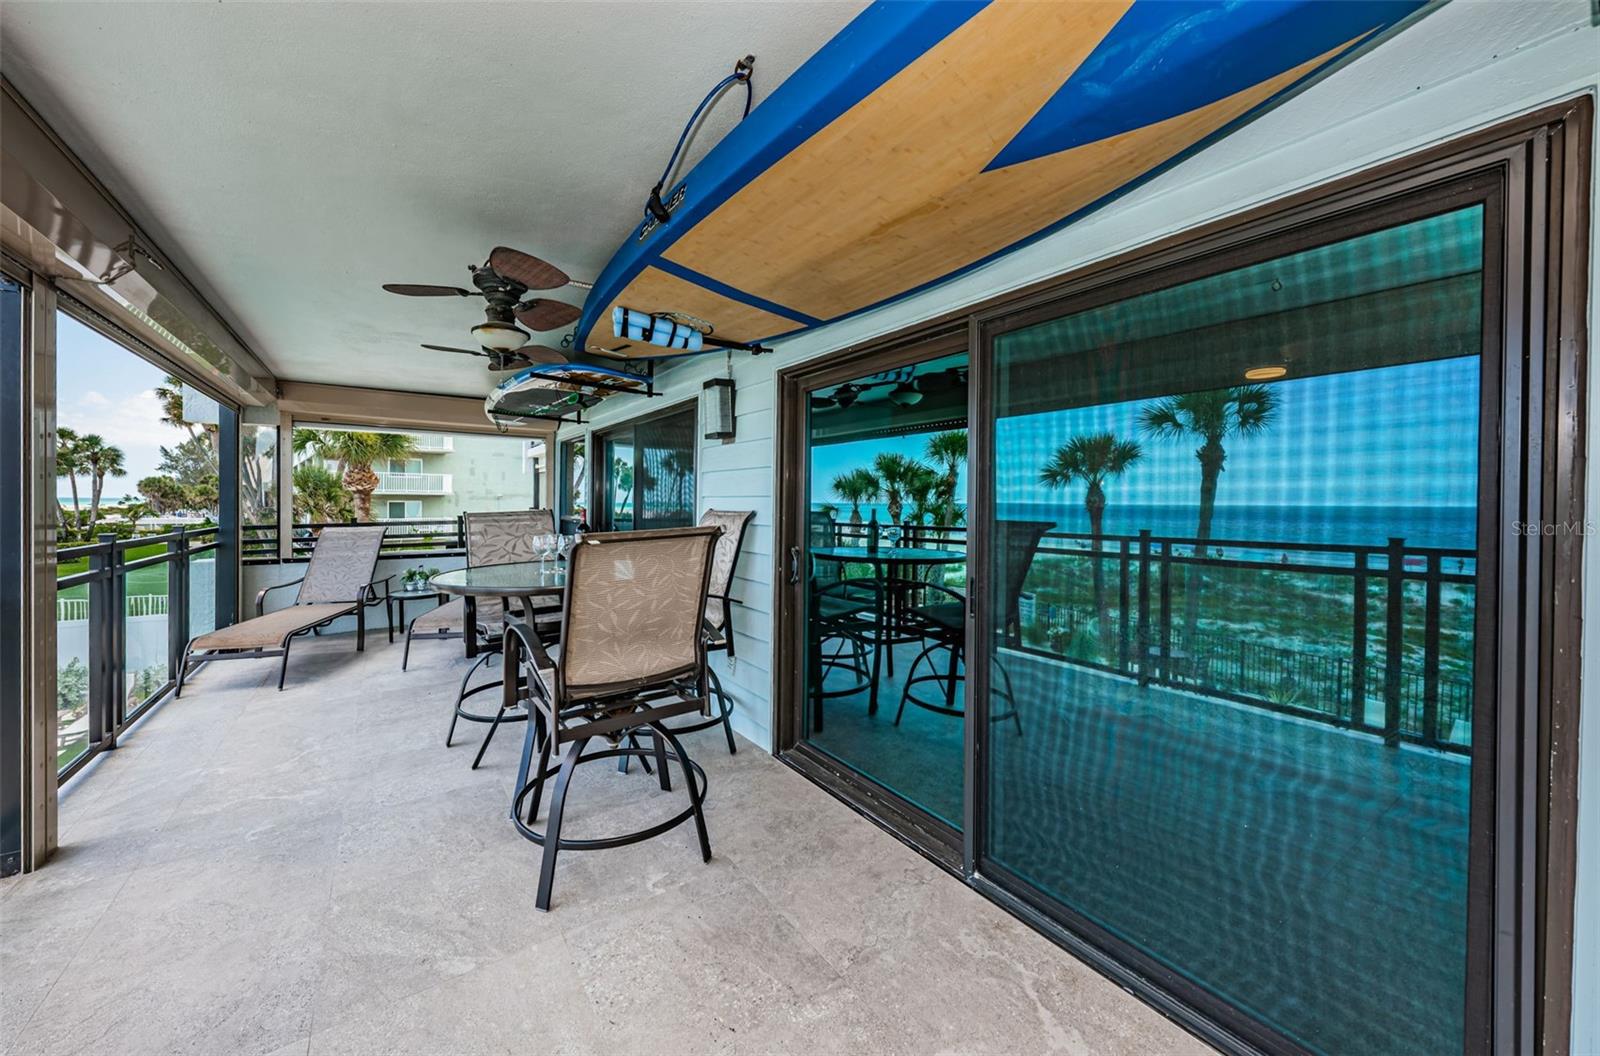 ... The  26' x 10' Balconies That The Beach House Condos Enjoys  are Fantastic and One of the Main Selling points of these Units..  Just a Great  Spot to Entertain Friends or Family or Just to Kick back  and Relax. Photo South to North..